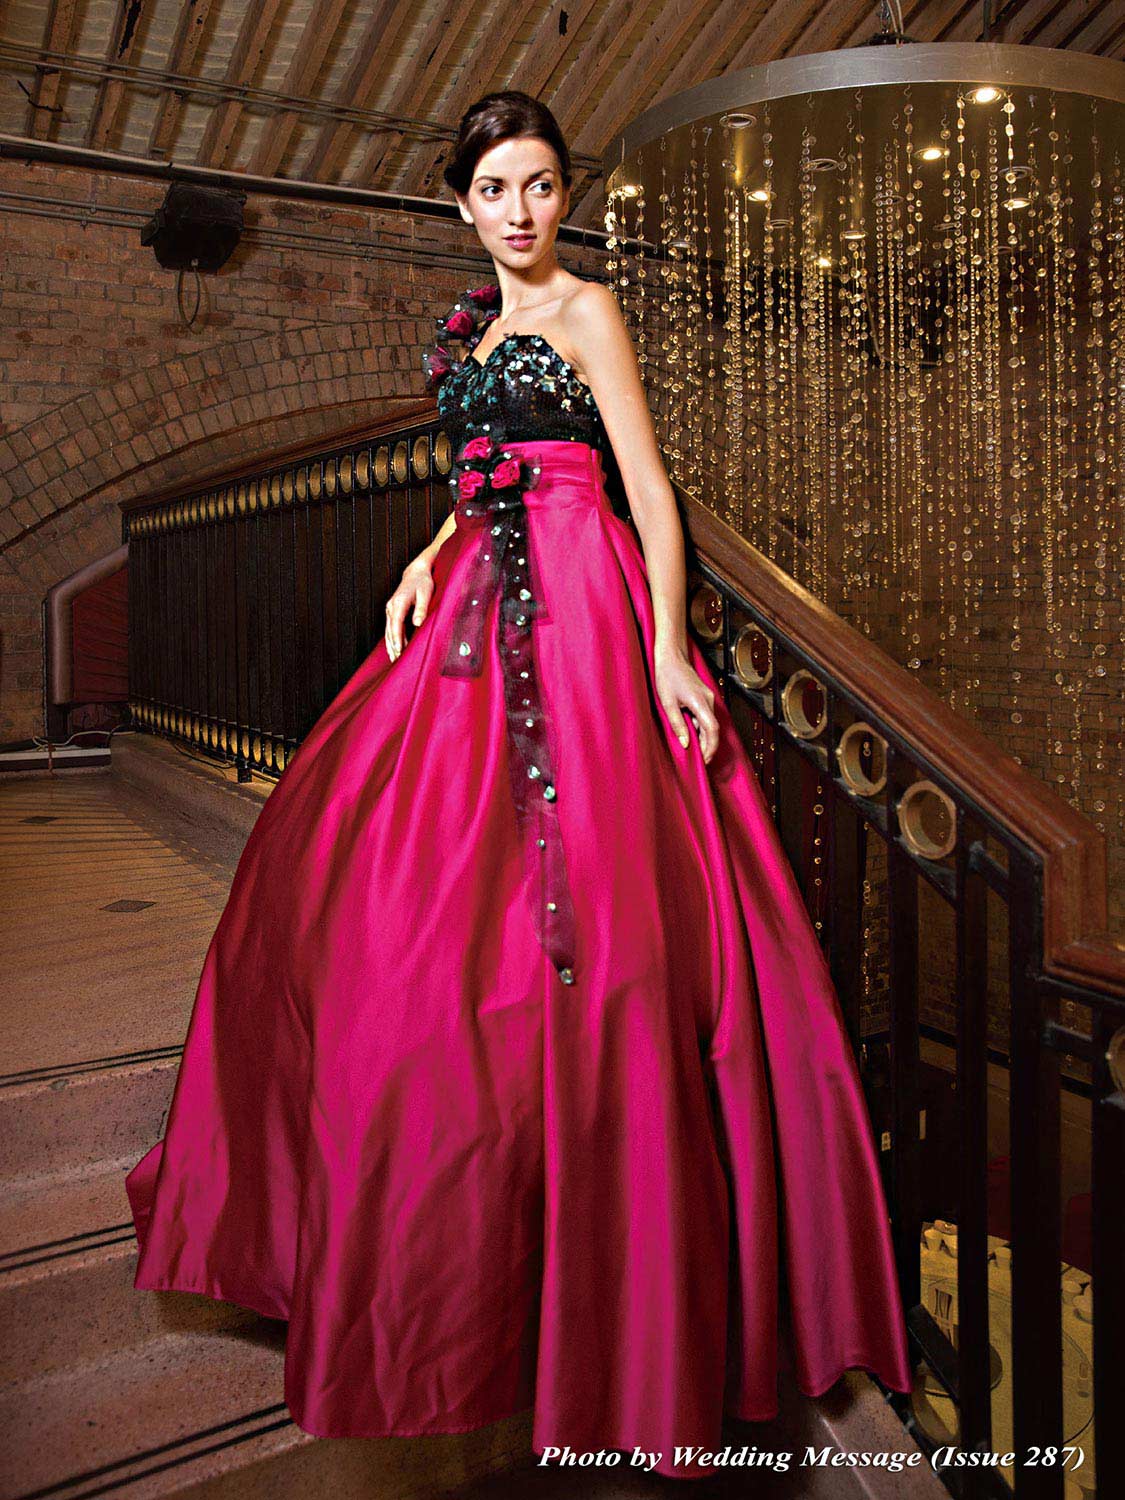 One-shoulder, floor-length, empire waistline evening gown with a sweetheart neckline, contrasting colour bodice embellished with sequins. Colour: Black and Fuschia 單膊, 心形胸, 黑色蕾絲閃片上身, 高腰款,桃紅色裙擺晚裝傘裙